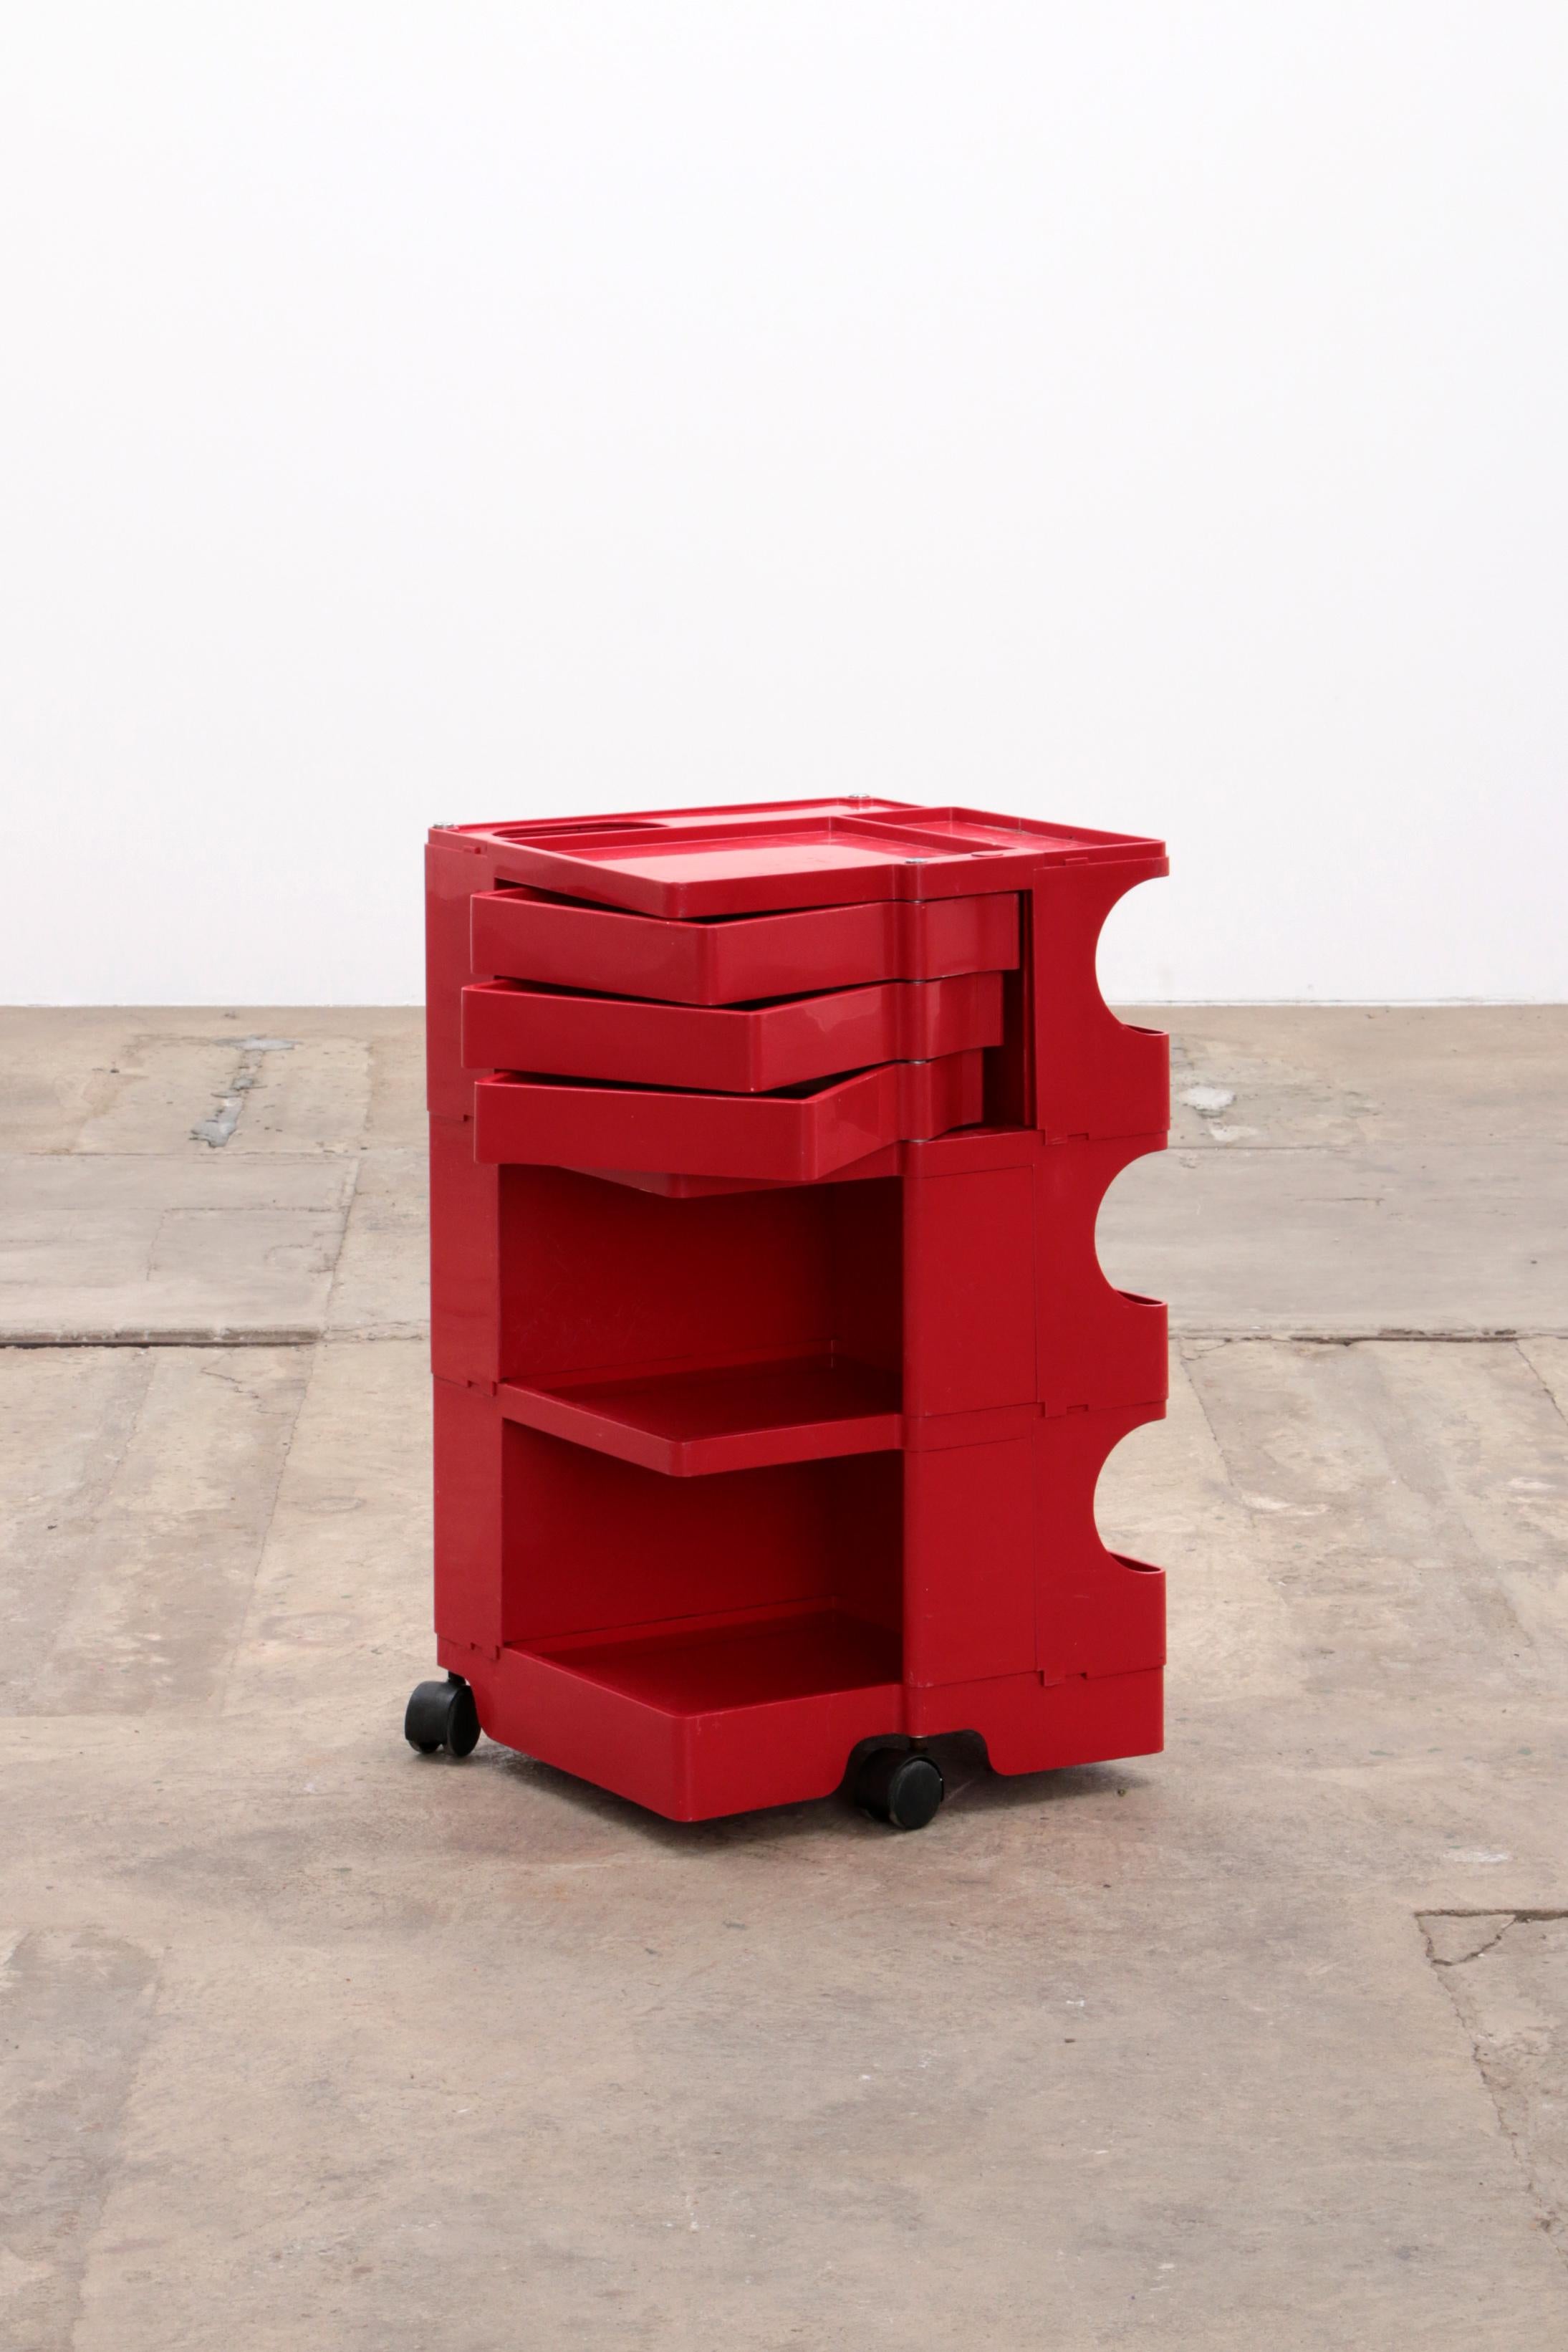 Discover Joe Colombo's Iconic Red 'Boby' Trolley

This beautiful red 'Boby' trolley, designed by the renowned Joe Colombo, is not only a feast for the eyes, but also an example of functionality and well-thought-out design. Manufactured by